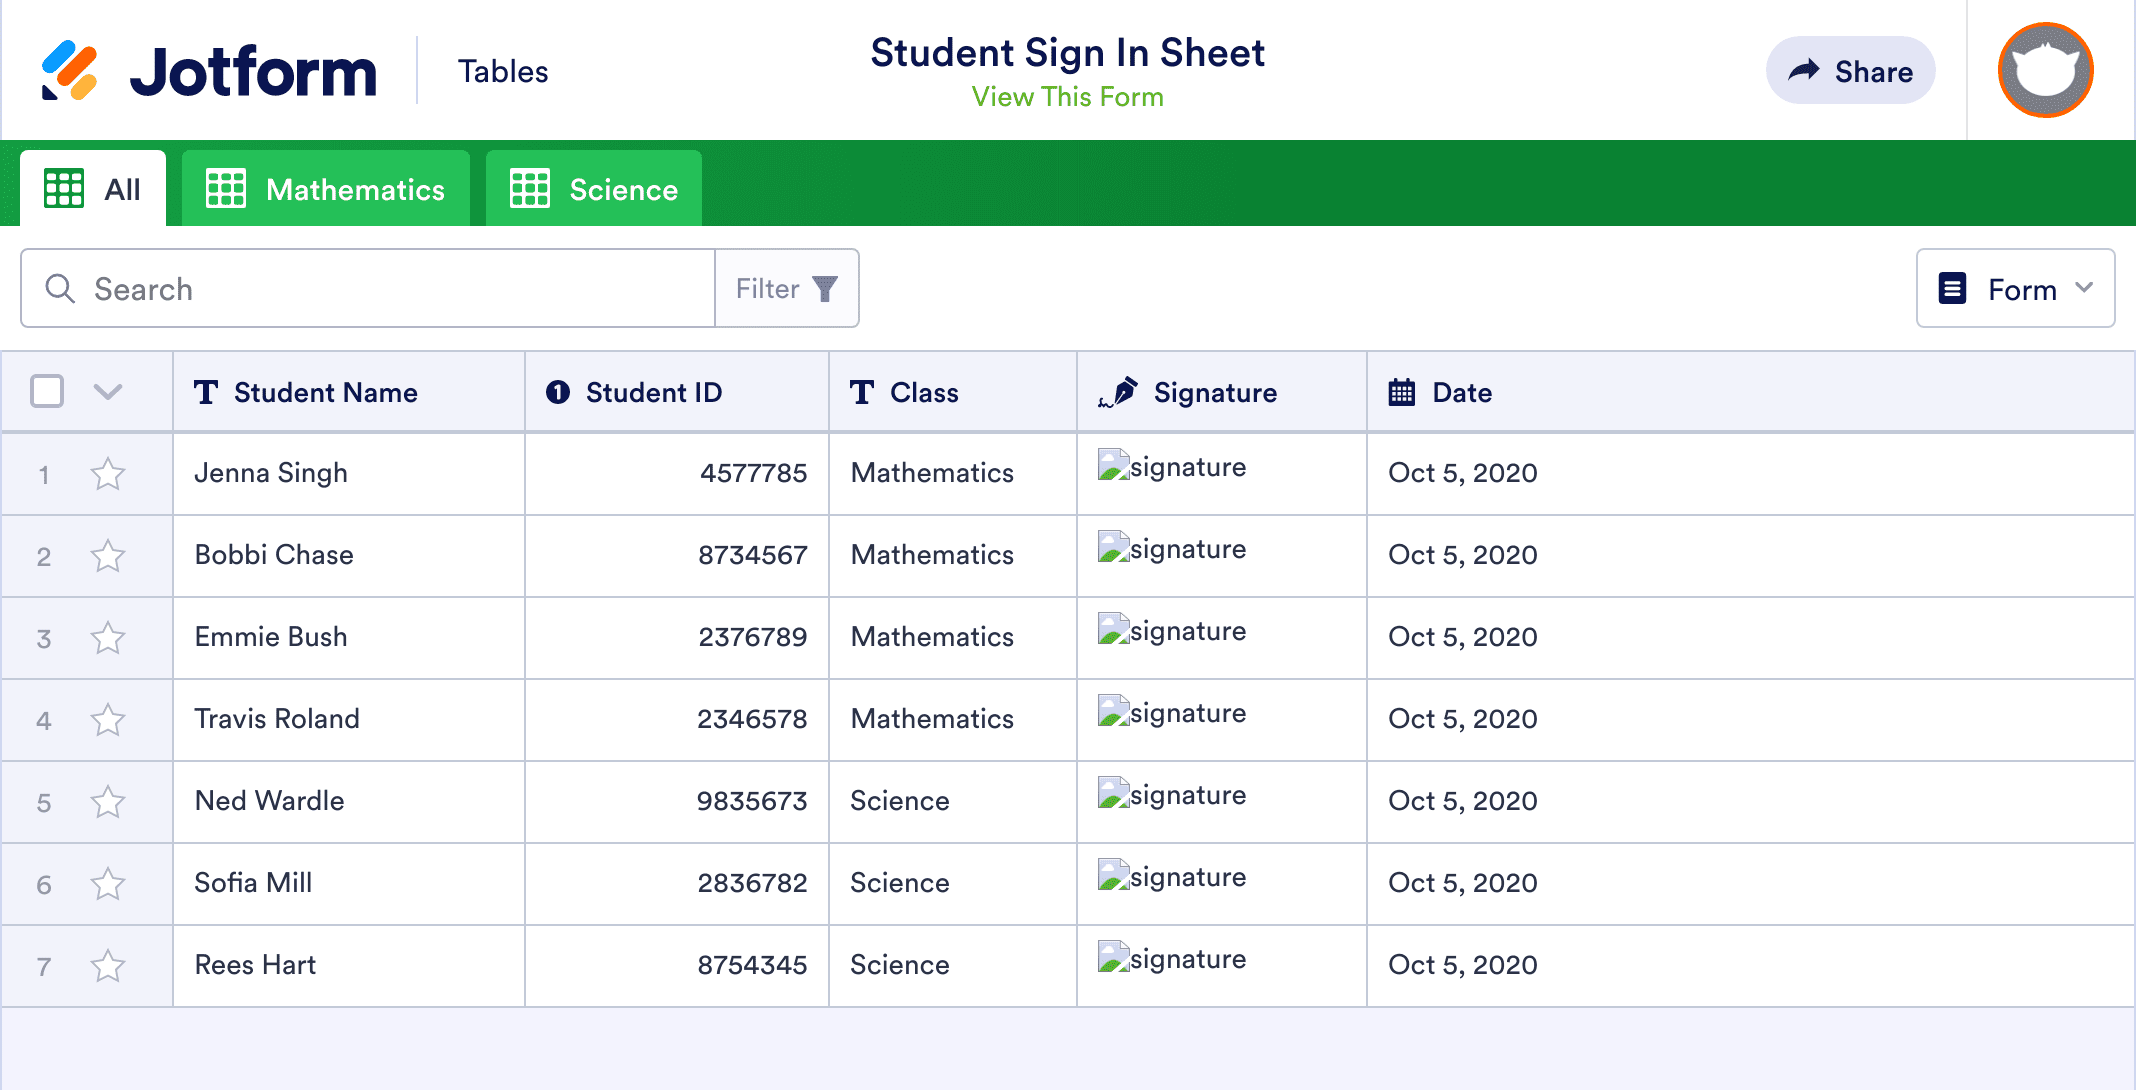 Student Sign In Sheet